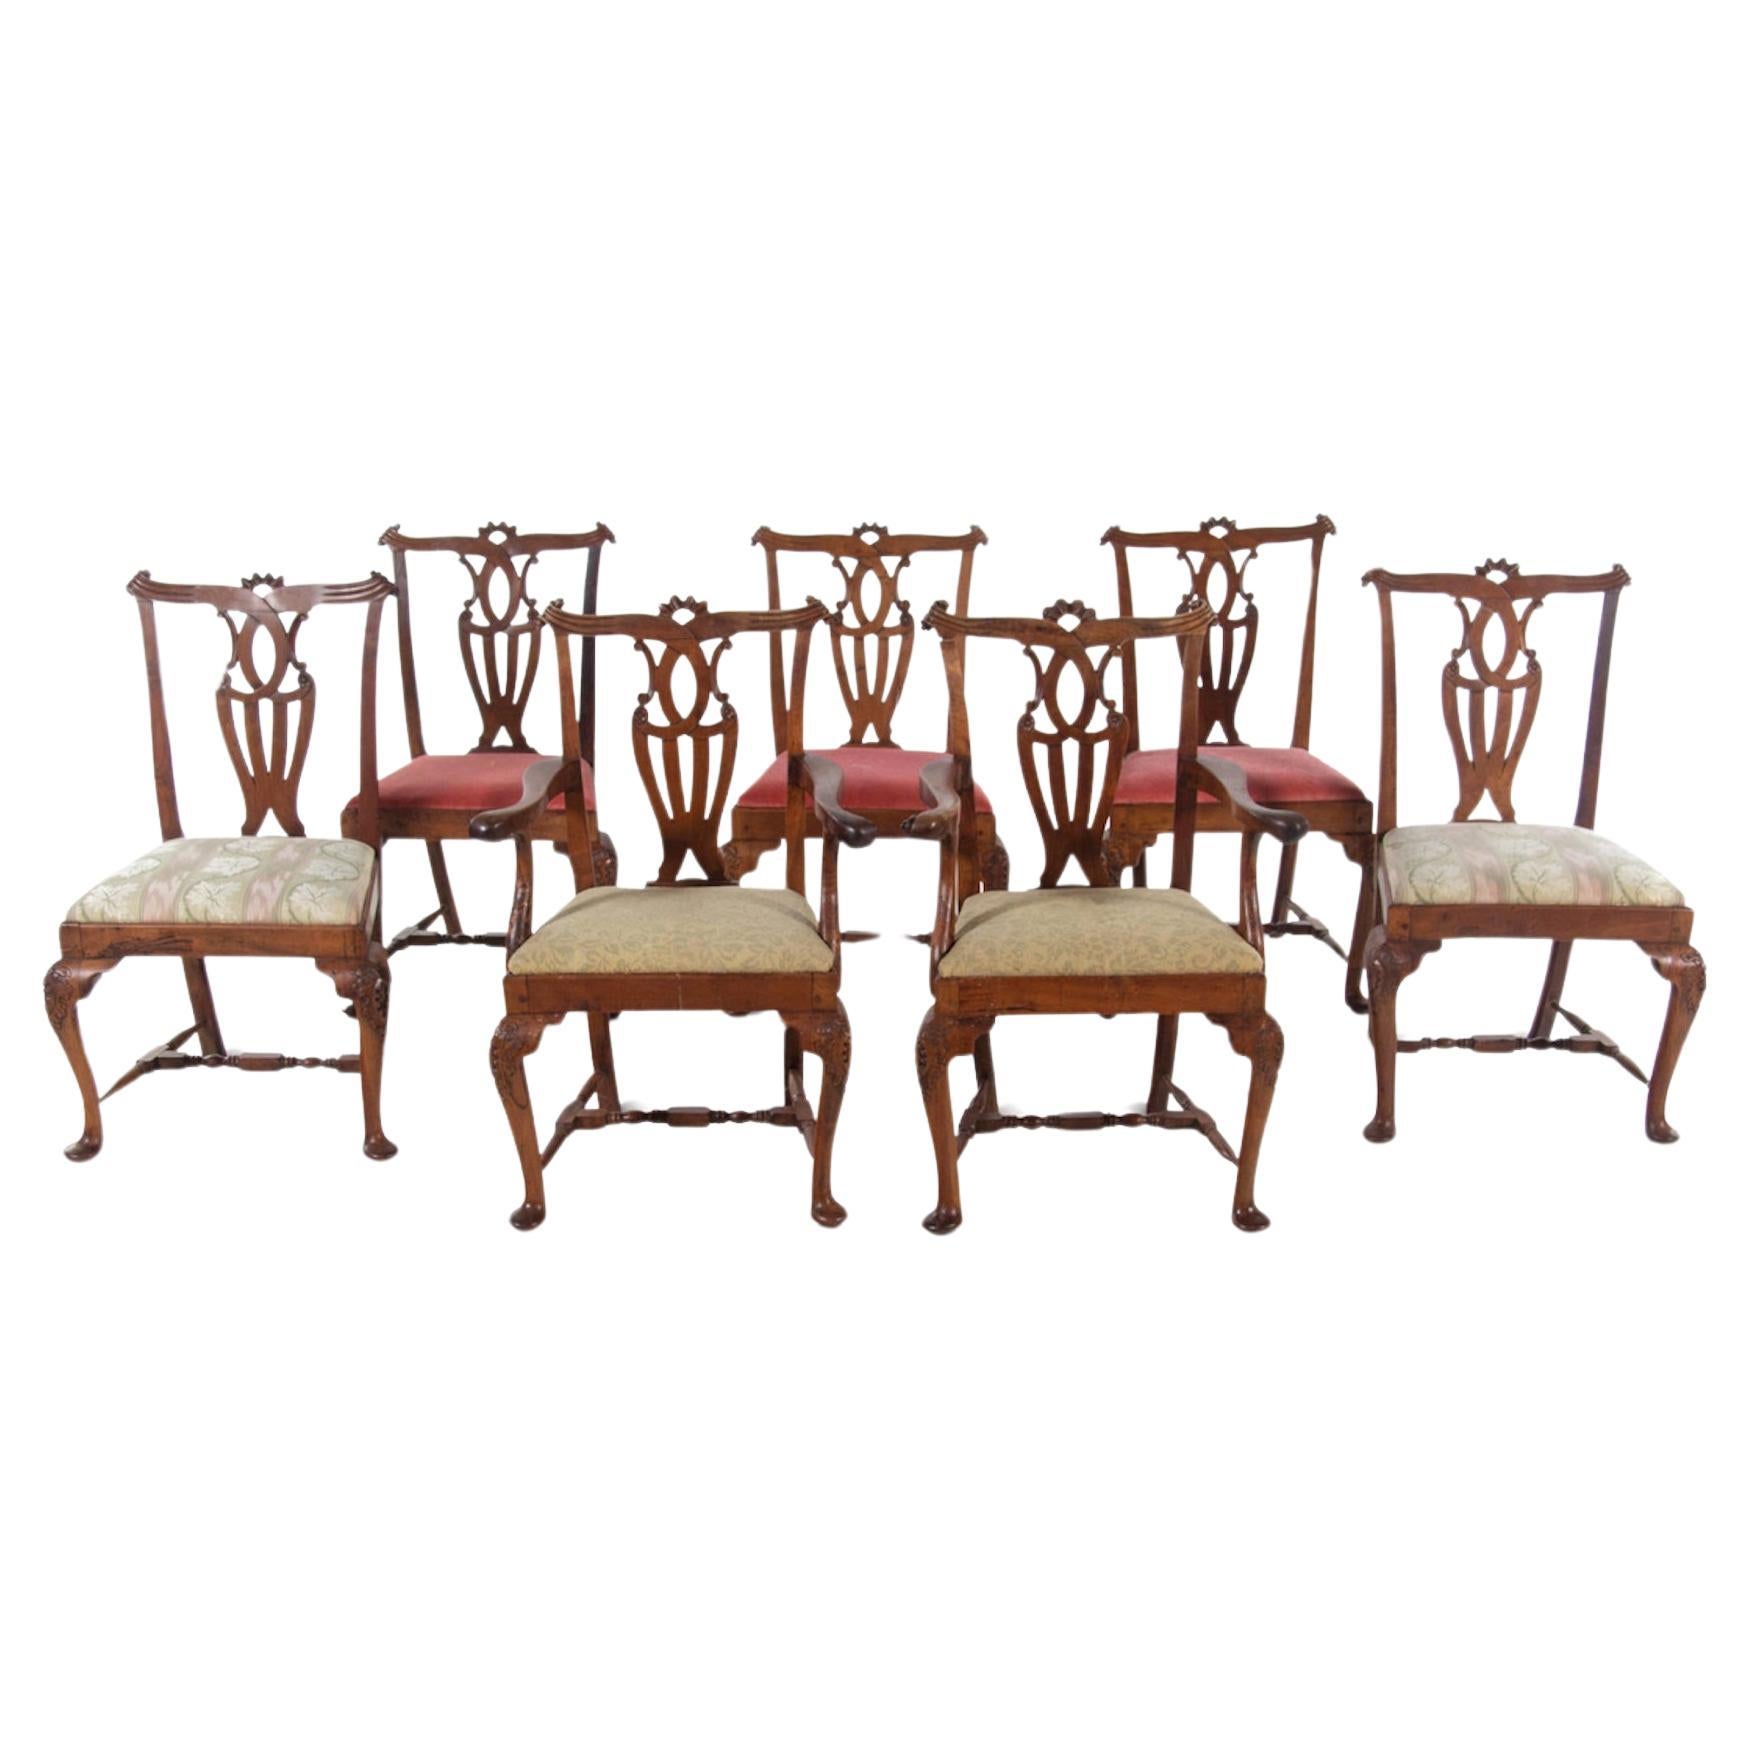 A Set of Seven George III Irish Walnut Dining Chairs 18th Century, Great Scale.